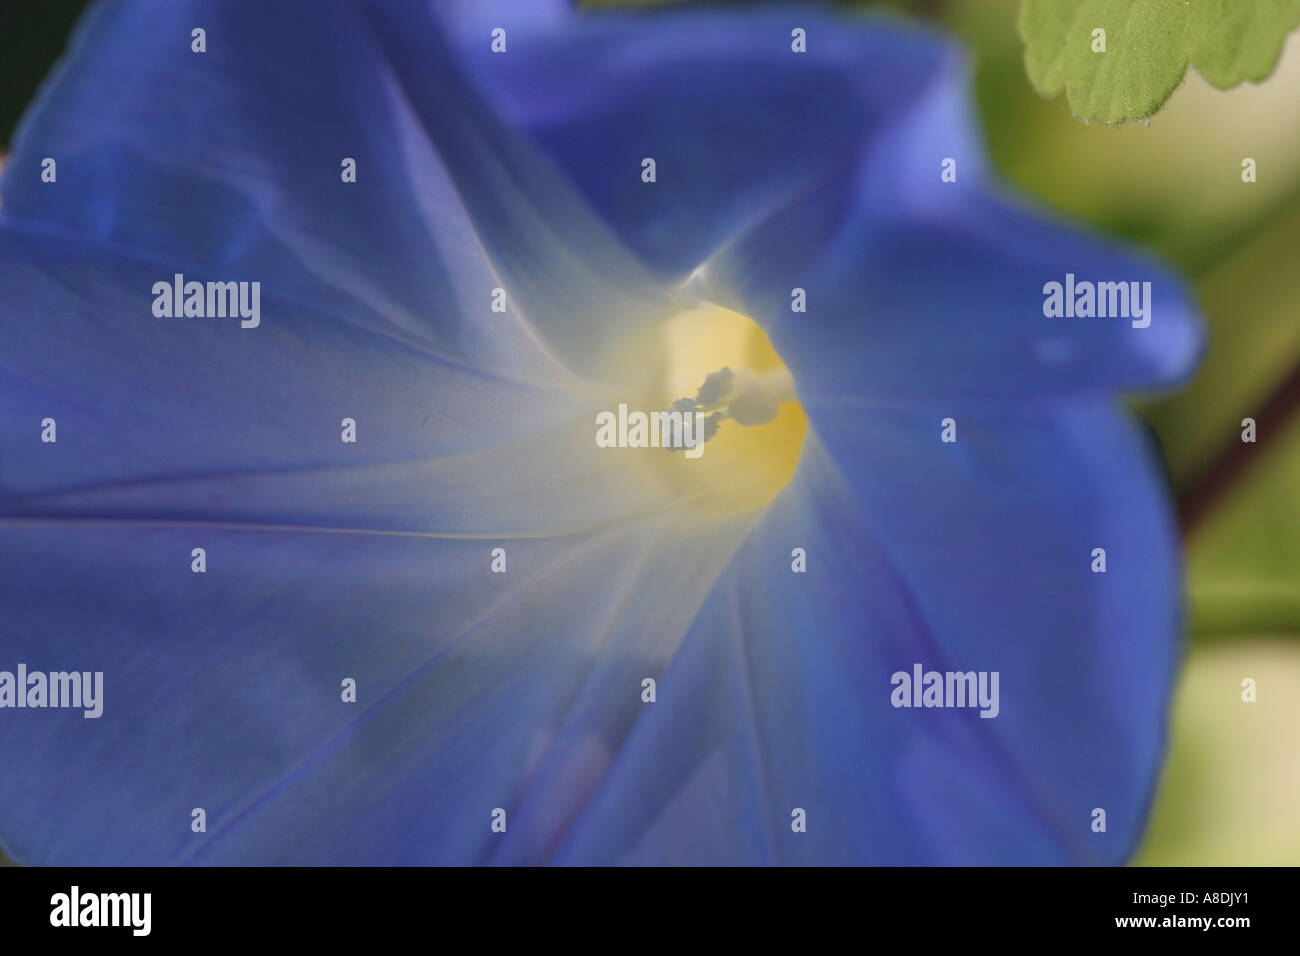 close up of single soft blue flower with yellow centre jenny davis Stock Photo